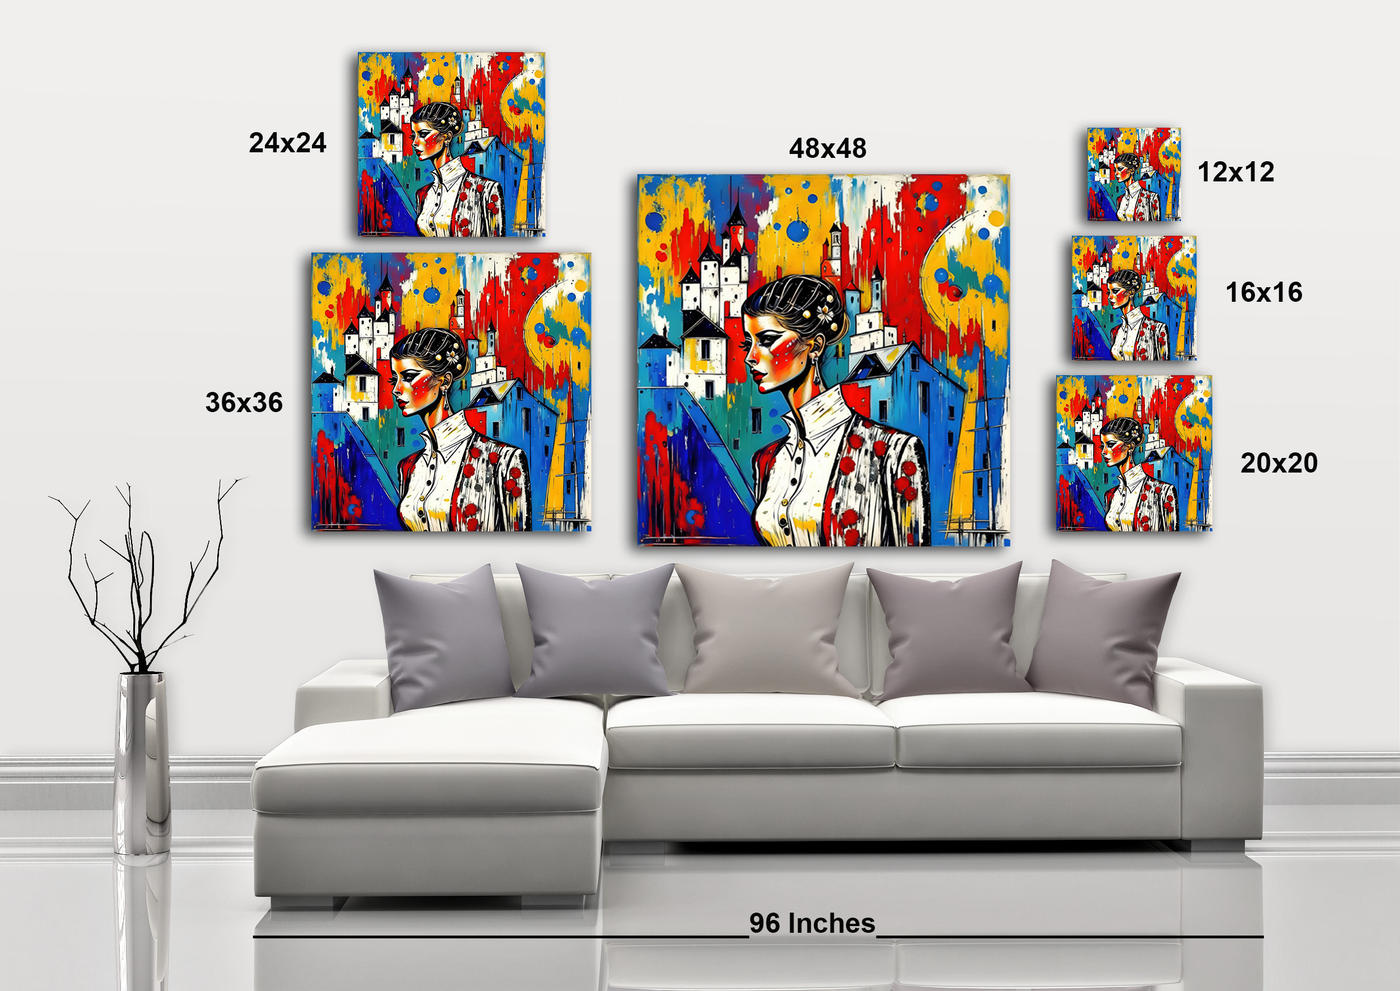 About Town - Gallery Wrapped Canvas